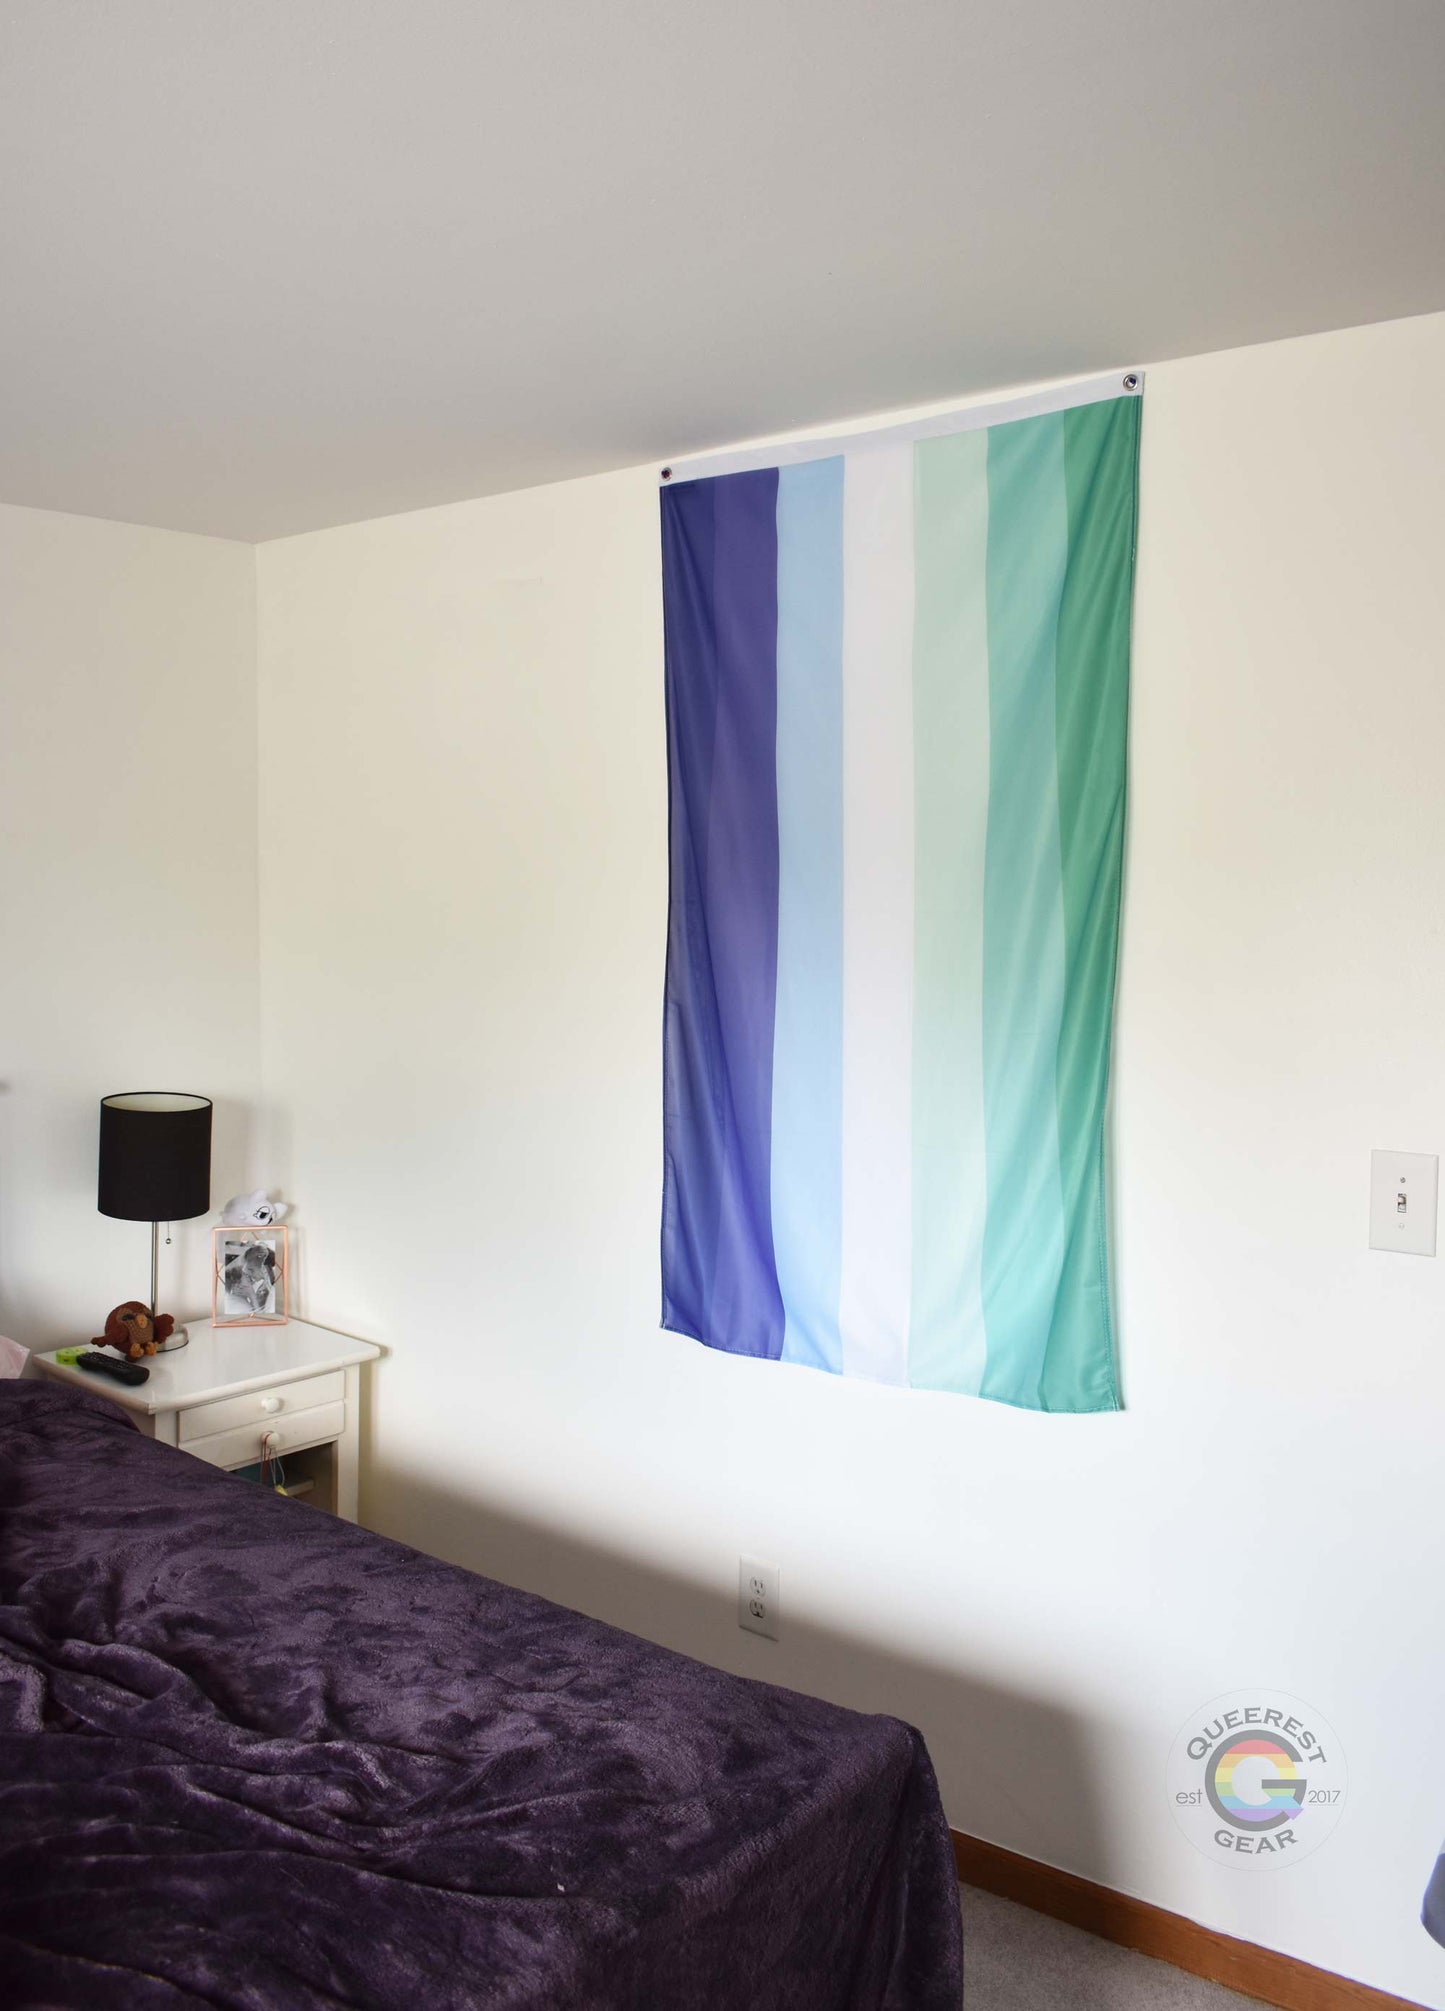  3’x5’ gay pride flag hanging vertically on the wall of a bedroom with a nightstand and a bed